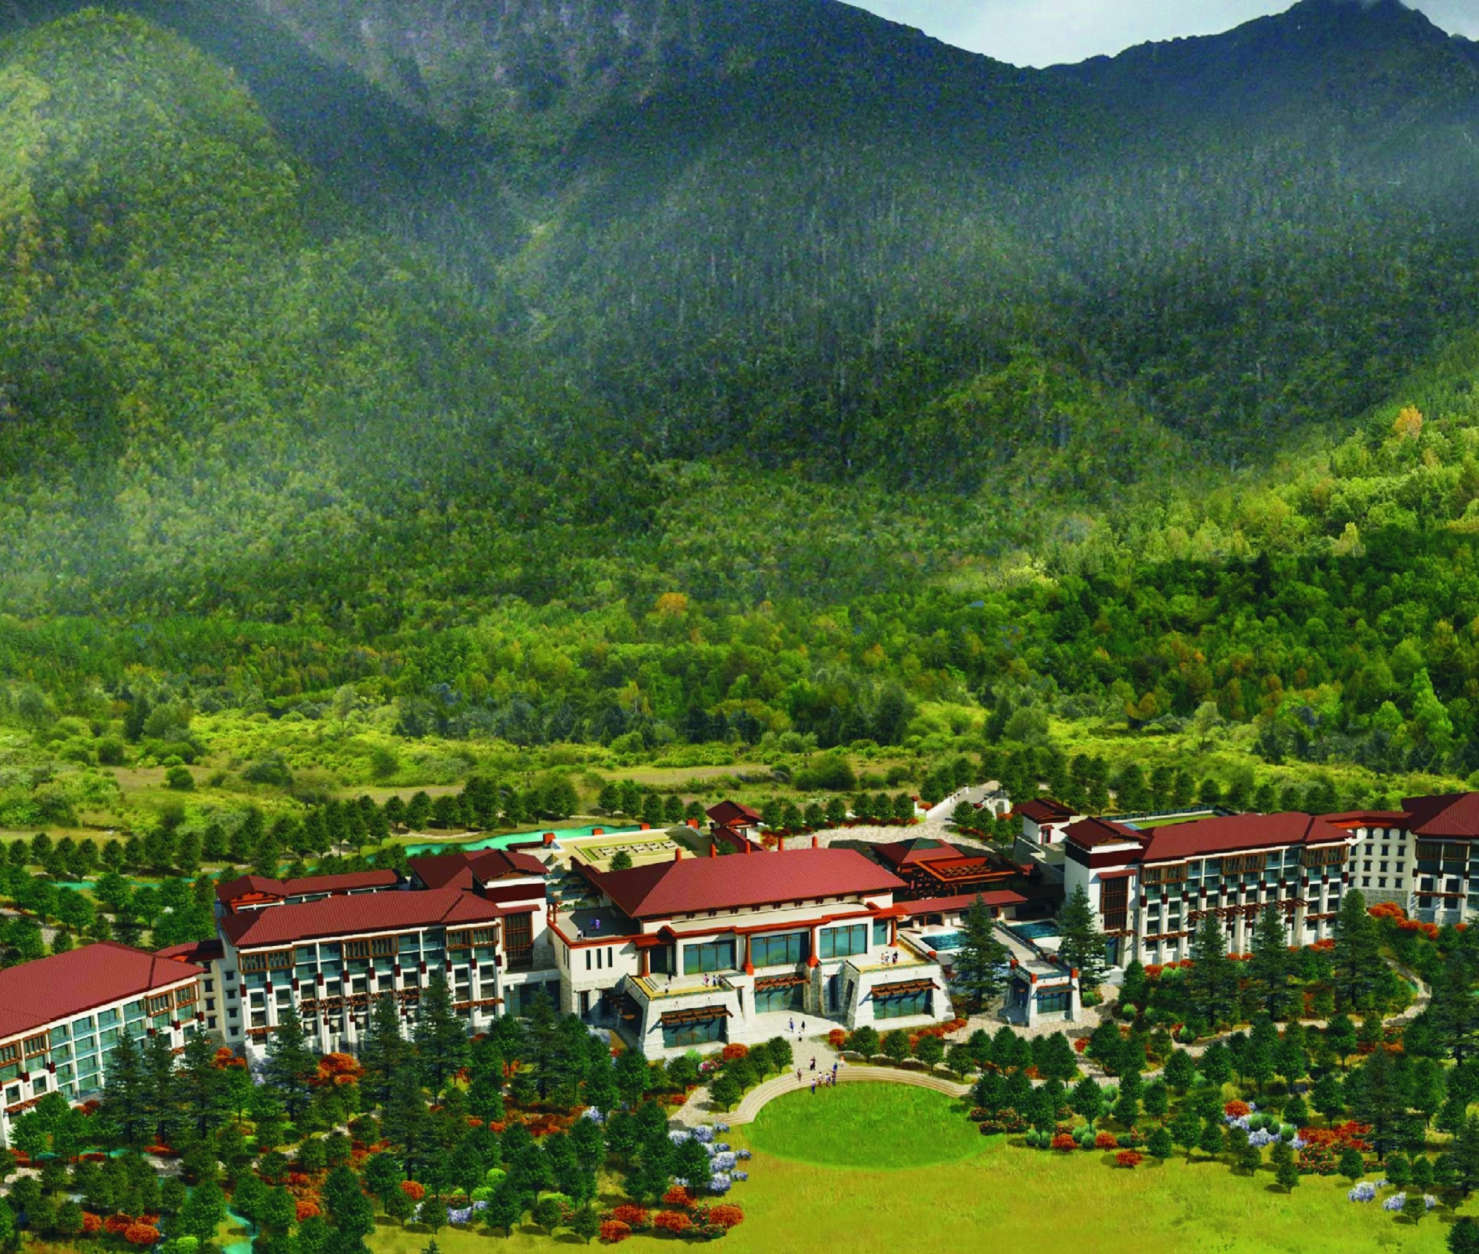 Hilton just opened Hilton Linzhi Resort, between the Himalayas and the Yarlung Zangbo River, on 800 acres at an elevation of about 9,800 feet. (Courtesy Hilton)